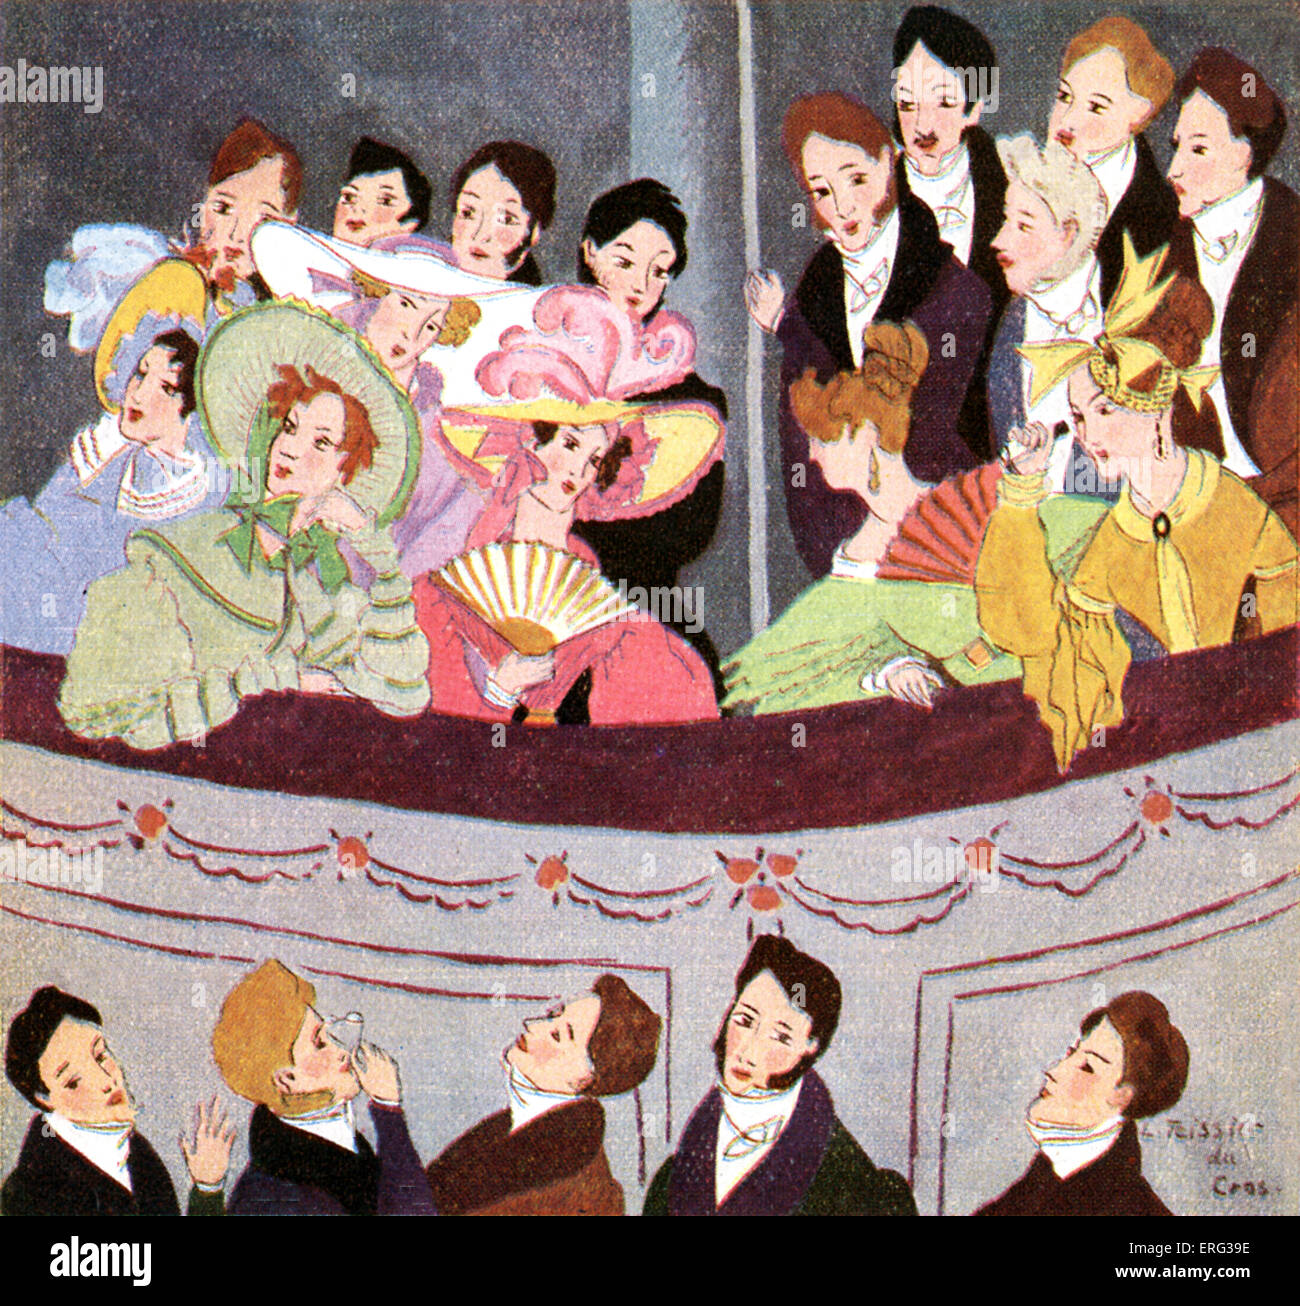 Parisian theatre-goers,   sitting in theatre box impression of a scene from 1831. France.  Illustration by L. Teissier du Cros, Stock Photo